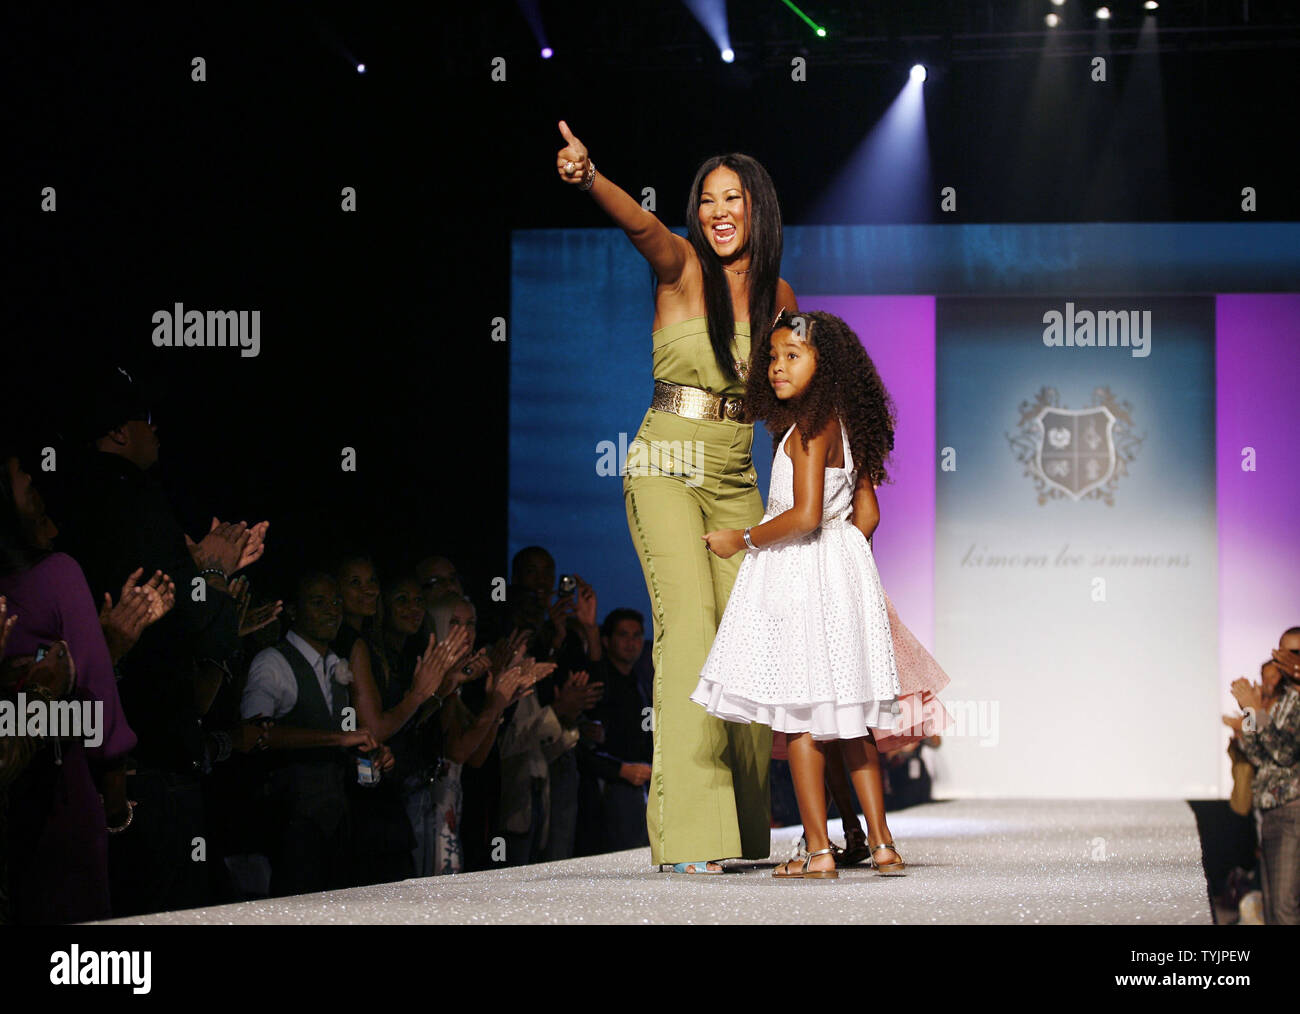 Kimora Lee Simmons walks out on the runway with children Ming and Aoki after the Baby Phat Decade fashion show at the Spring 2009 collections of Mercedes-Benz fashion week at Bryant Park in New York City on September 12, 2008.  (UPI Photo/John Angelillo)   . Stock Photo